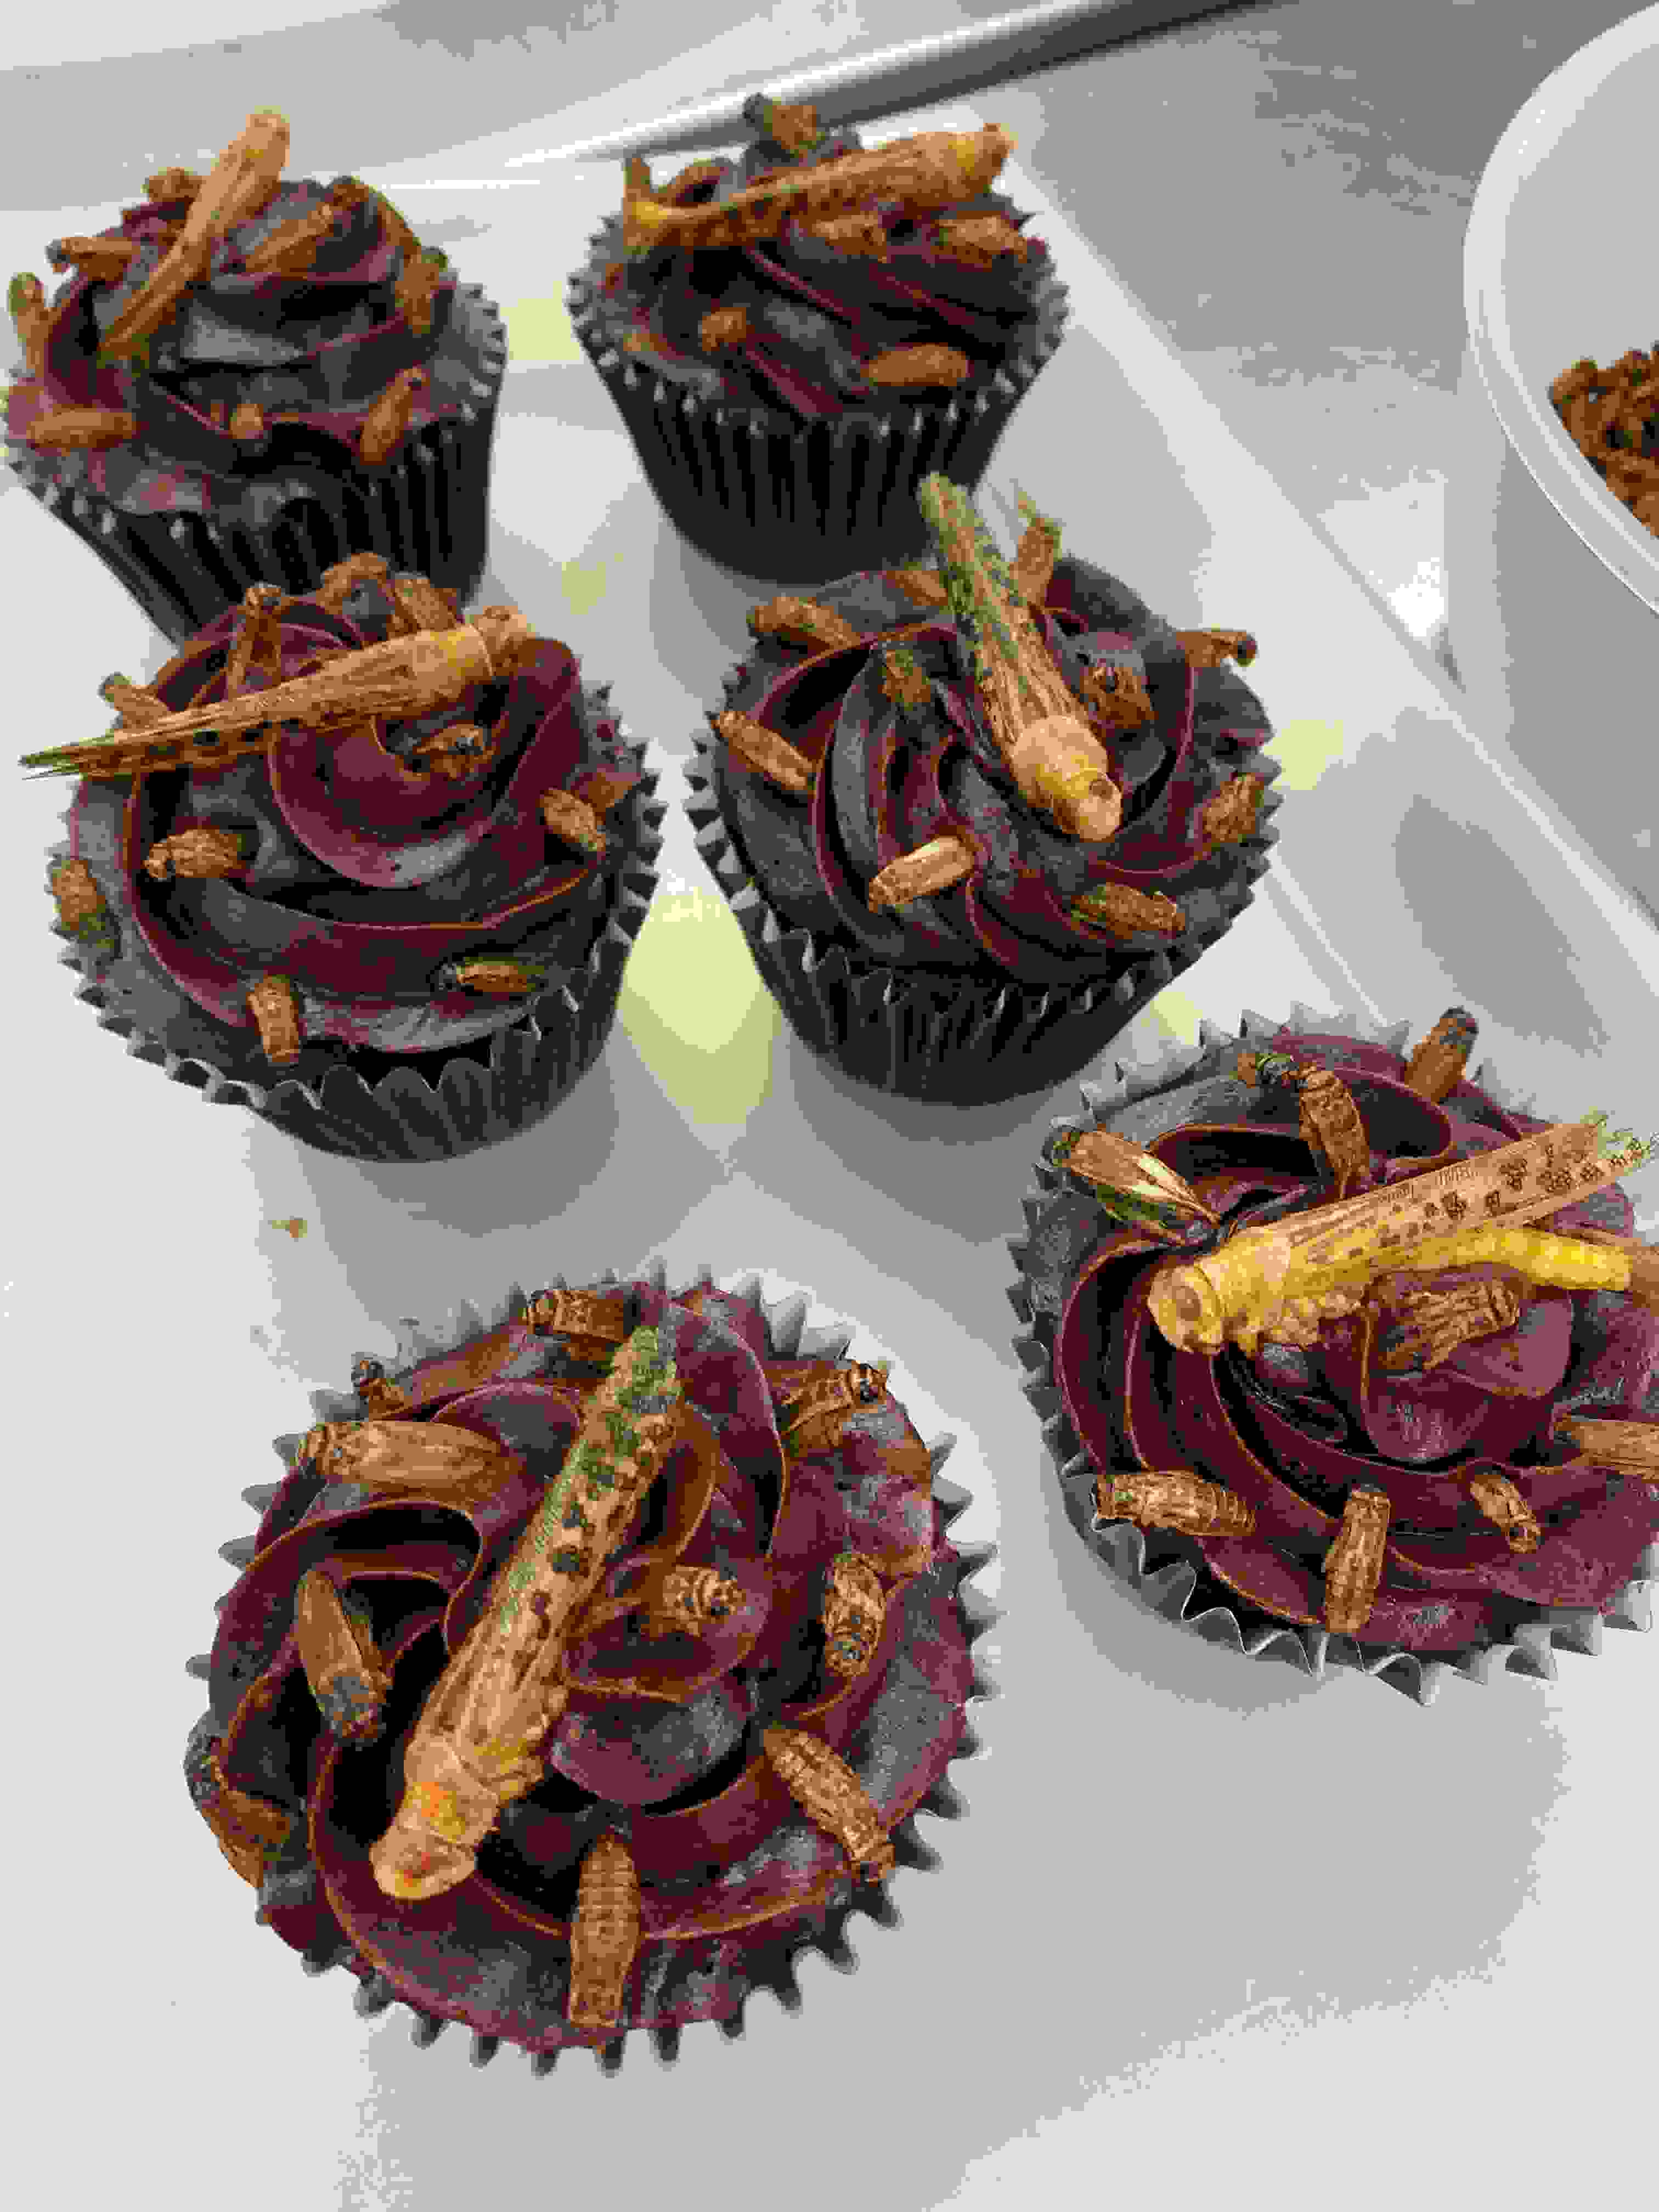 Chocolate Cupcakes with Edible Insects